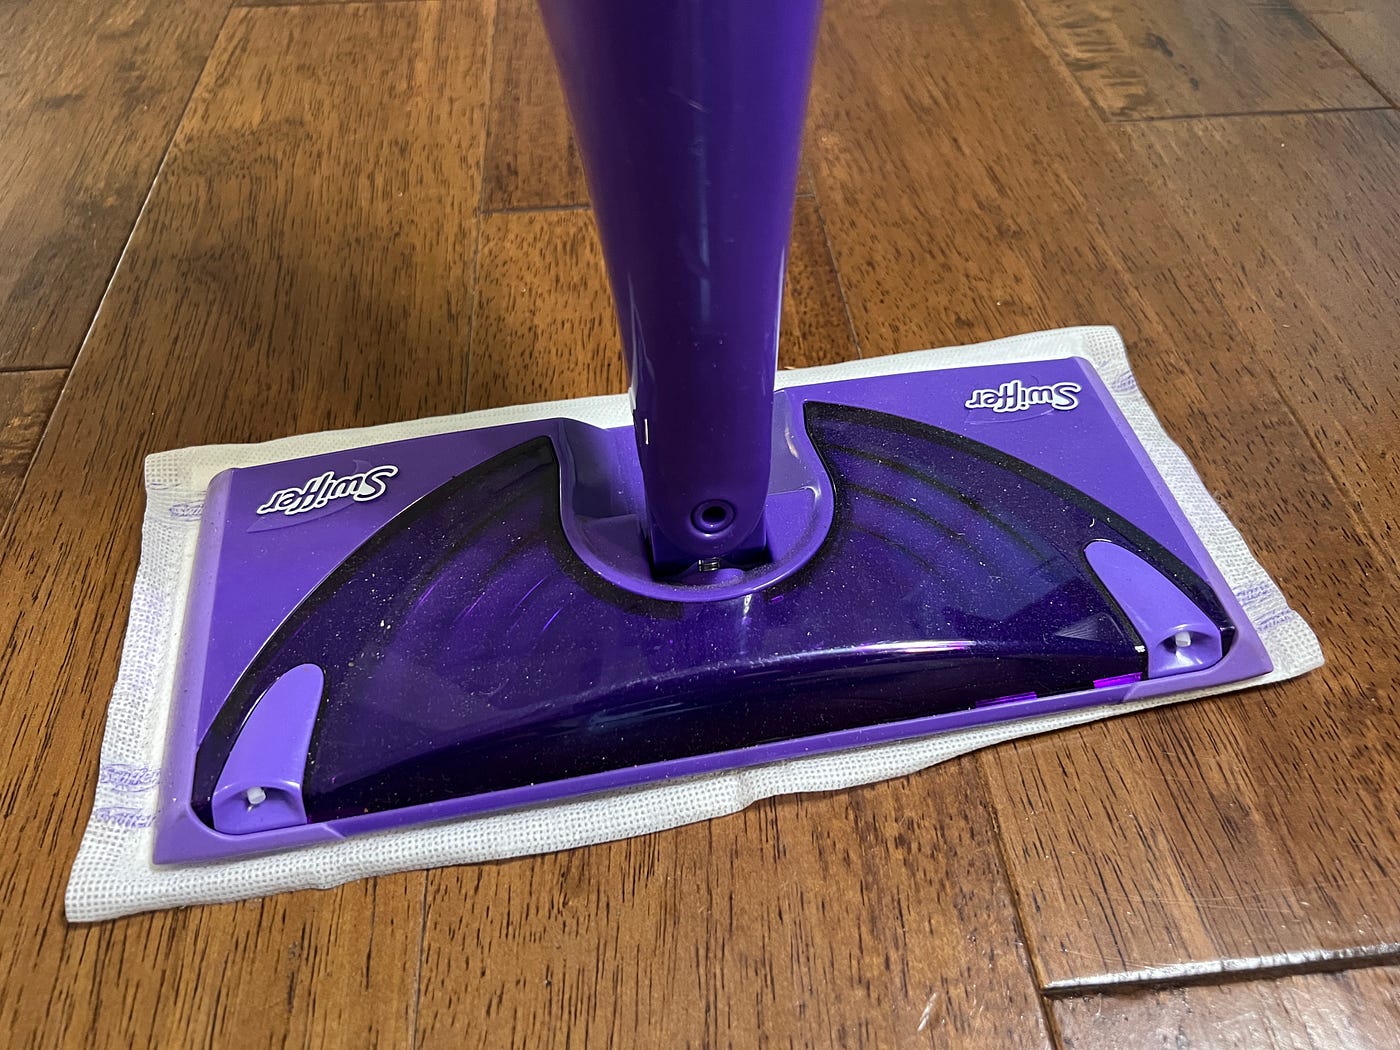 The Best Batteries for Your Swiffer WetJet, by Thomas Smith